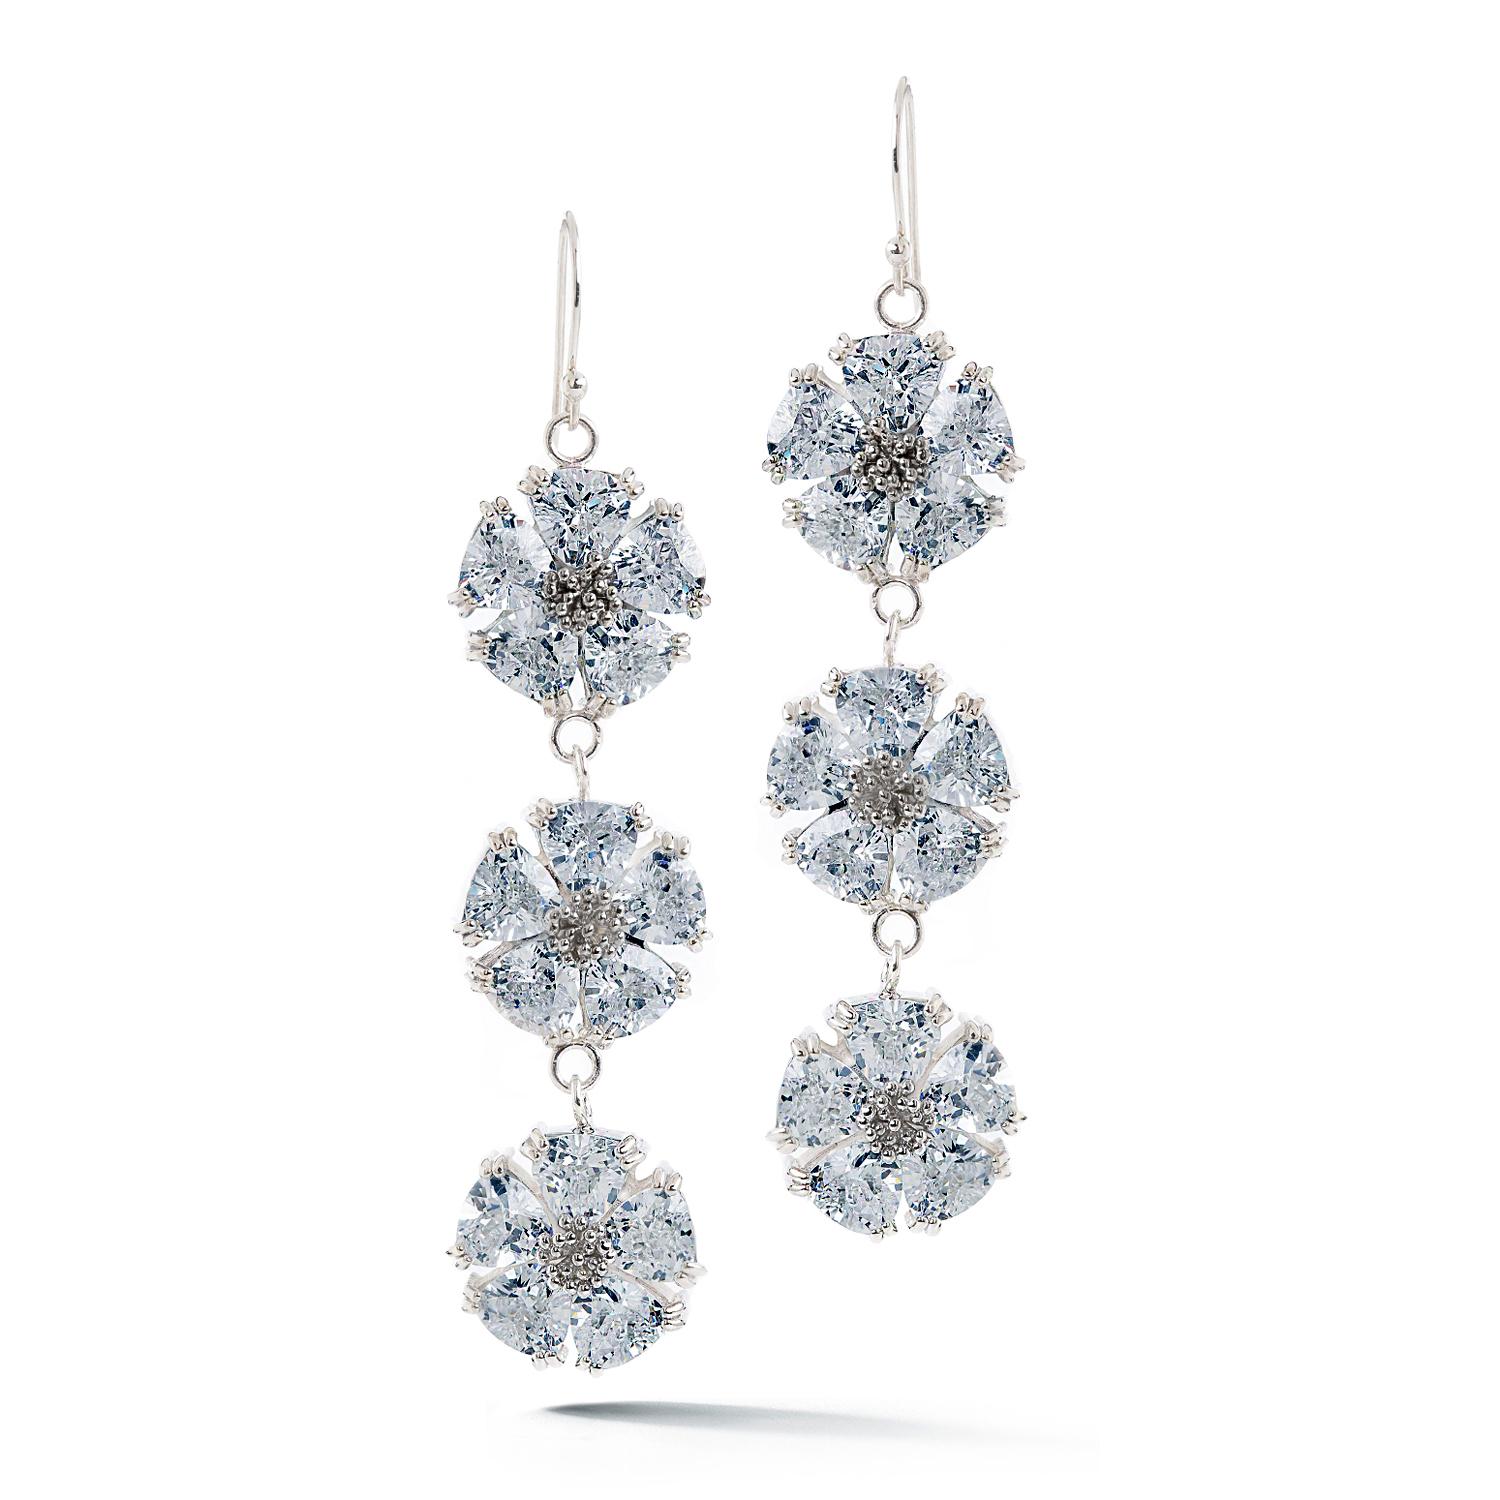 Designed in NYC

.925 Sterling Silver 30 x 7 mm White Sapphire Triple Blossom Stone Bling Earrings. No matter the season, allow natural beauty to surround you wherever you go. Triple blossom stone bling earrings: 

Sterling silver 
High-polish